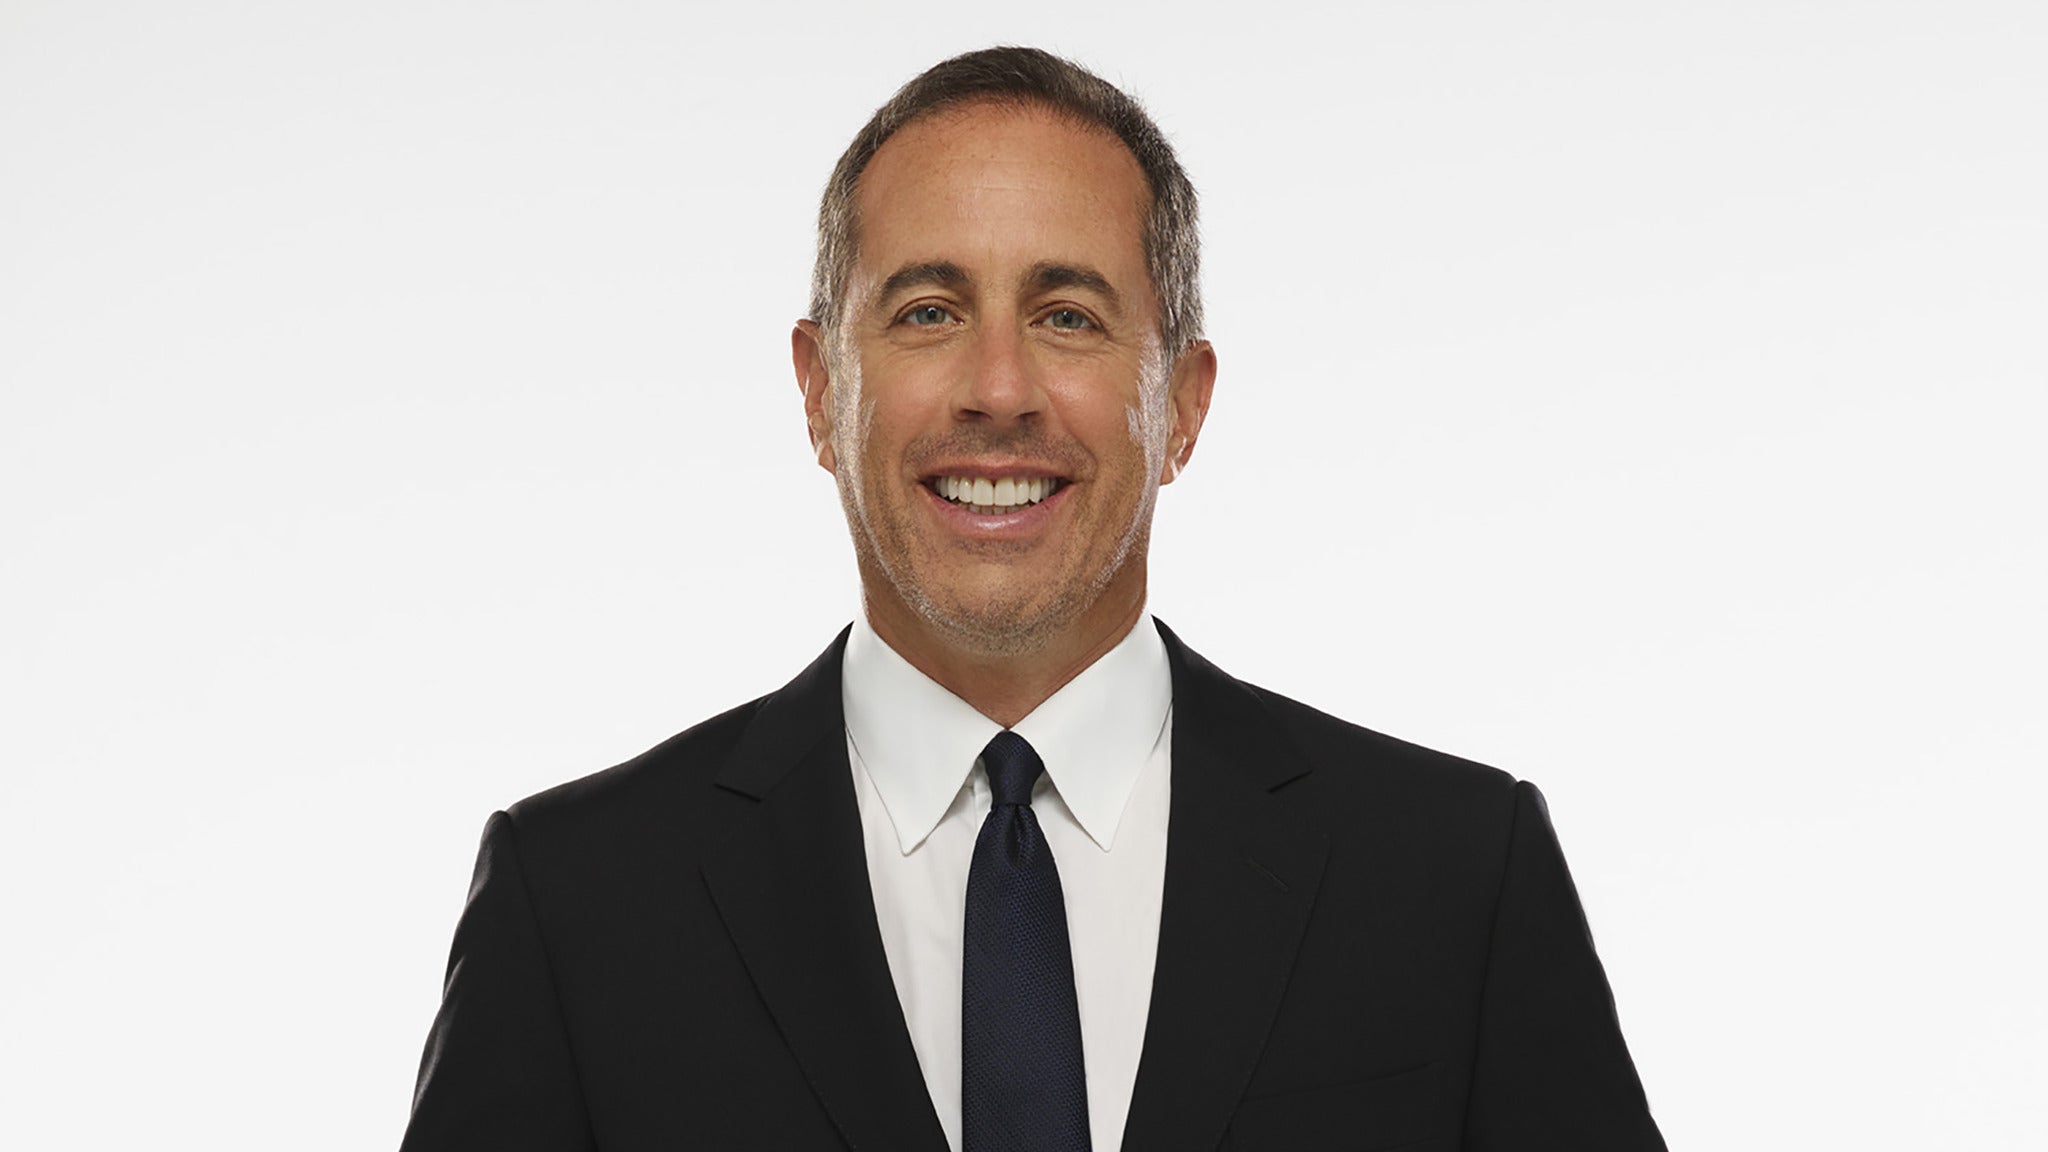 Jerry Seinfeld at San Jose Center for the Performing Arts